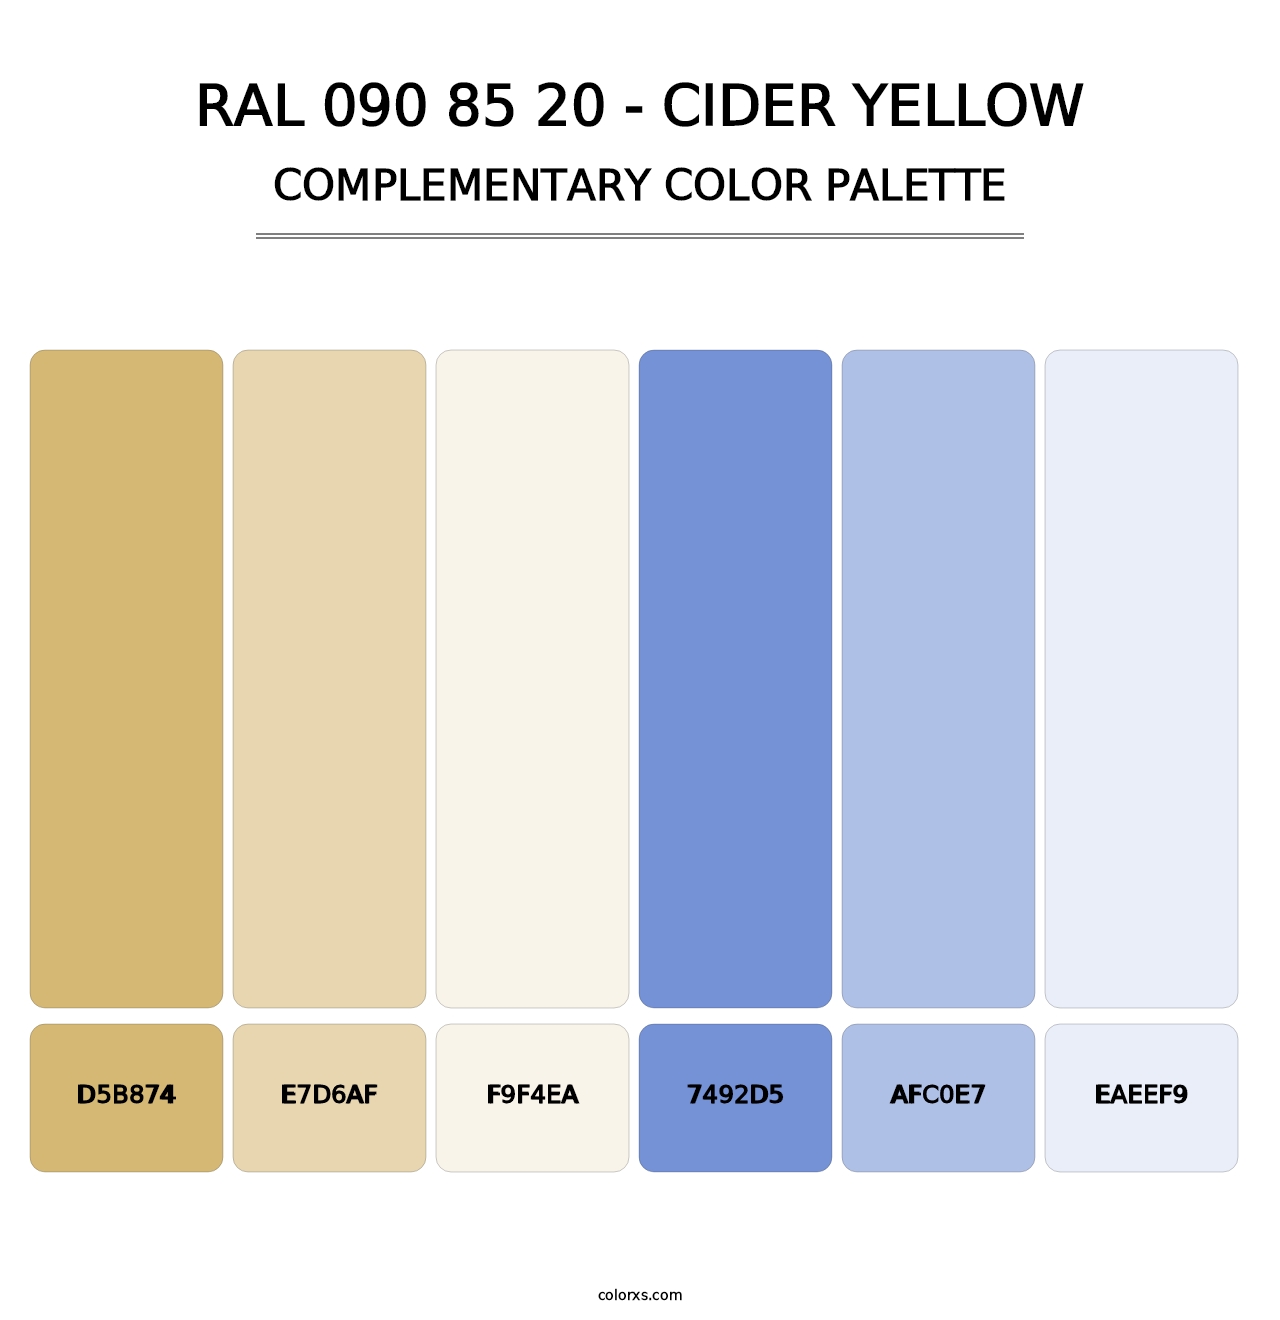 RAL 090 85 20 - Cider Yellow - Complementary Color Palette